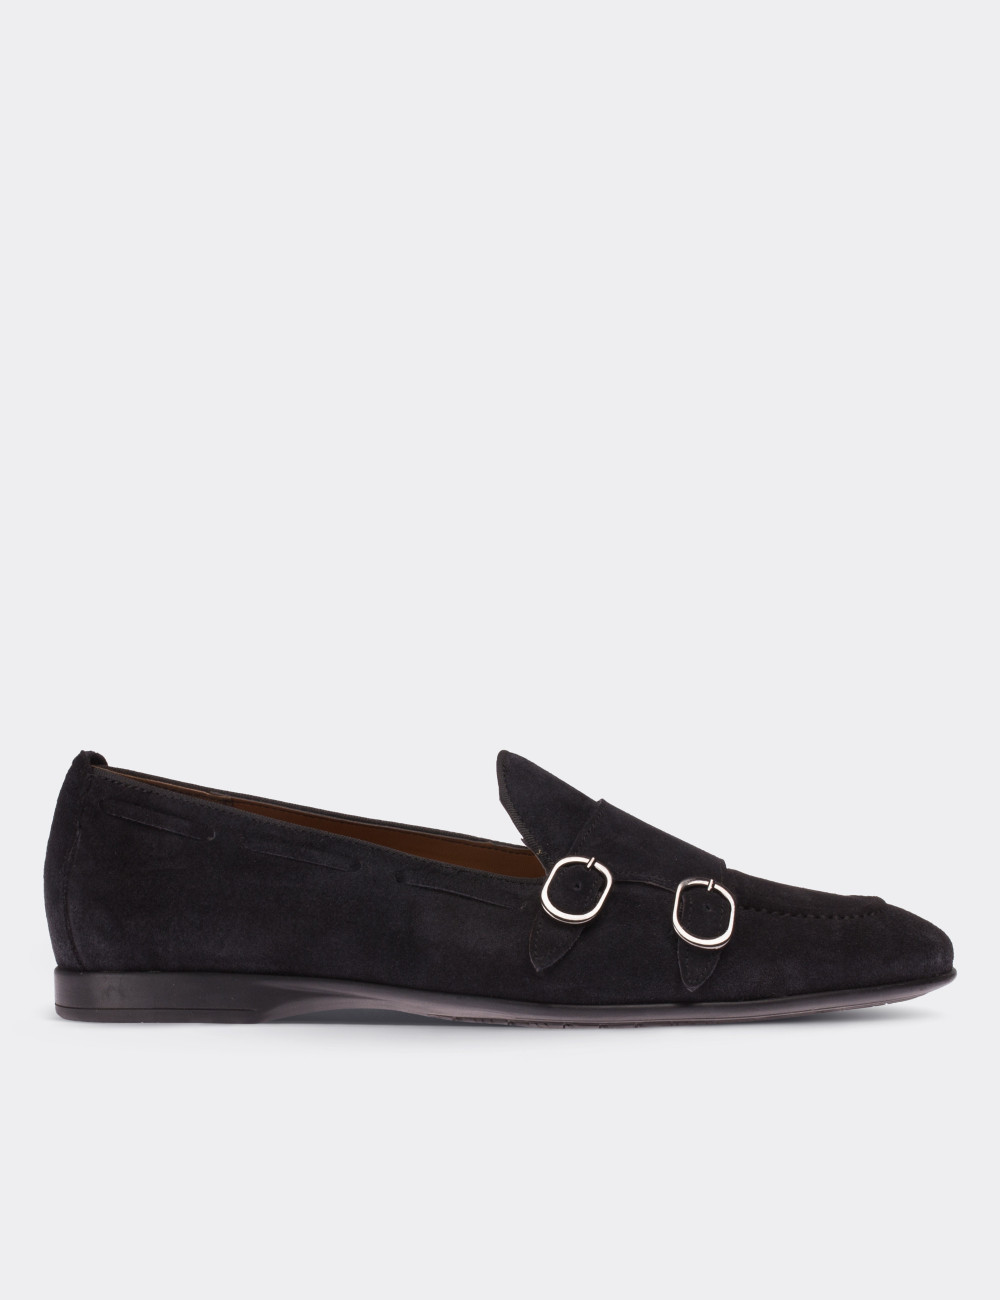 Navy Suede Leather Loafers - 01645MLCVC02